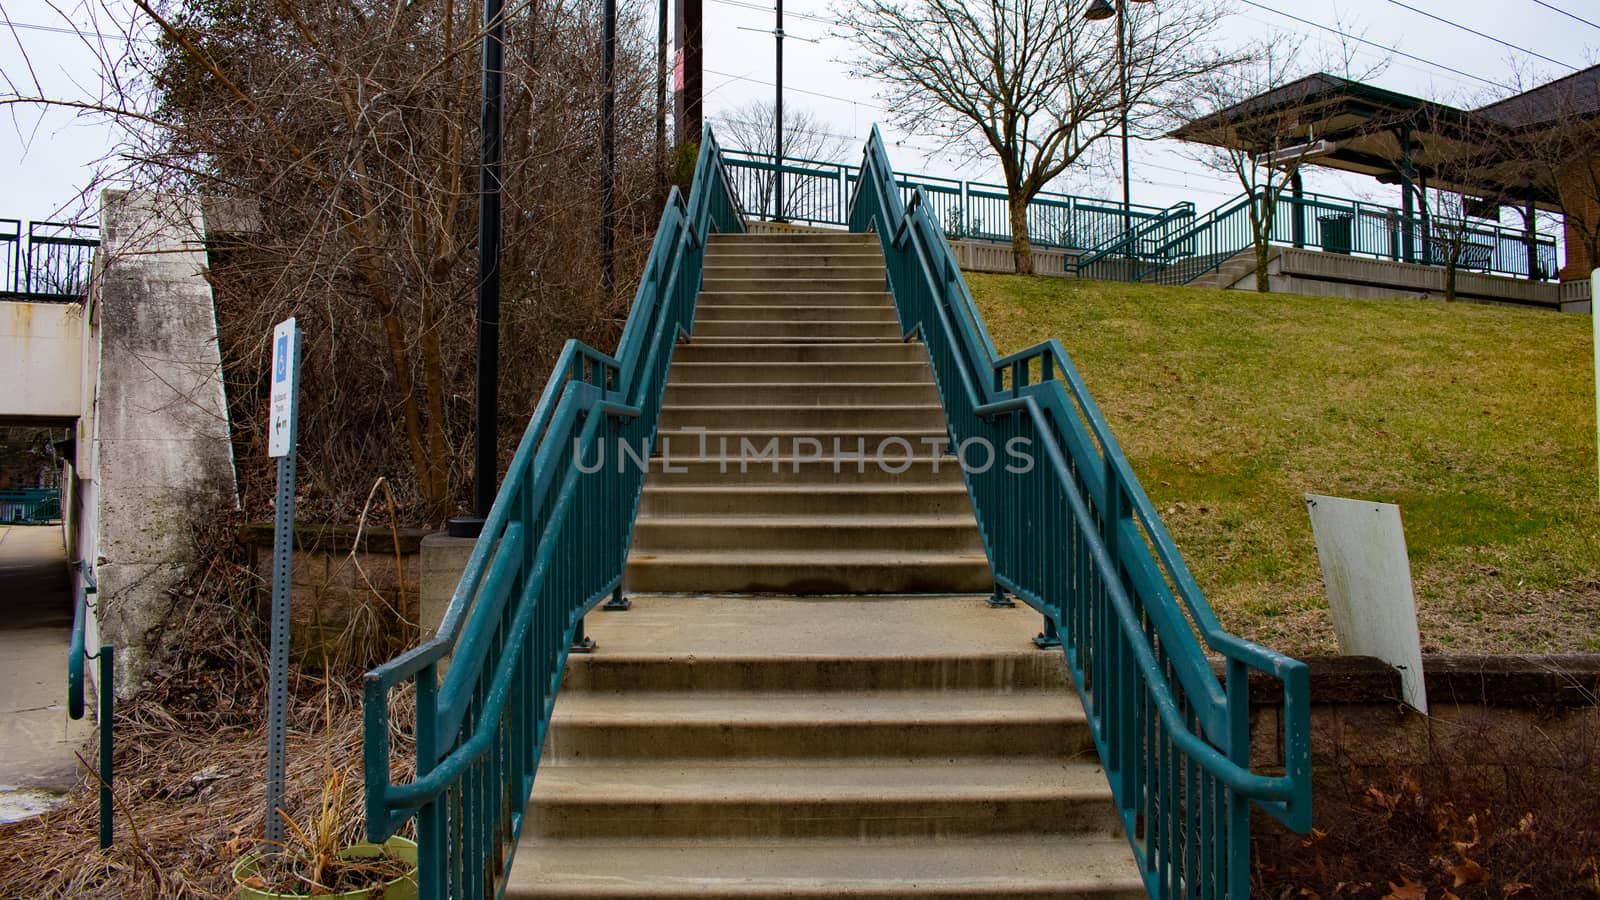 Light Concrete Steps Leading Up to a Train Station With Blue Railings on Each Side on a Cloudy Day